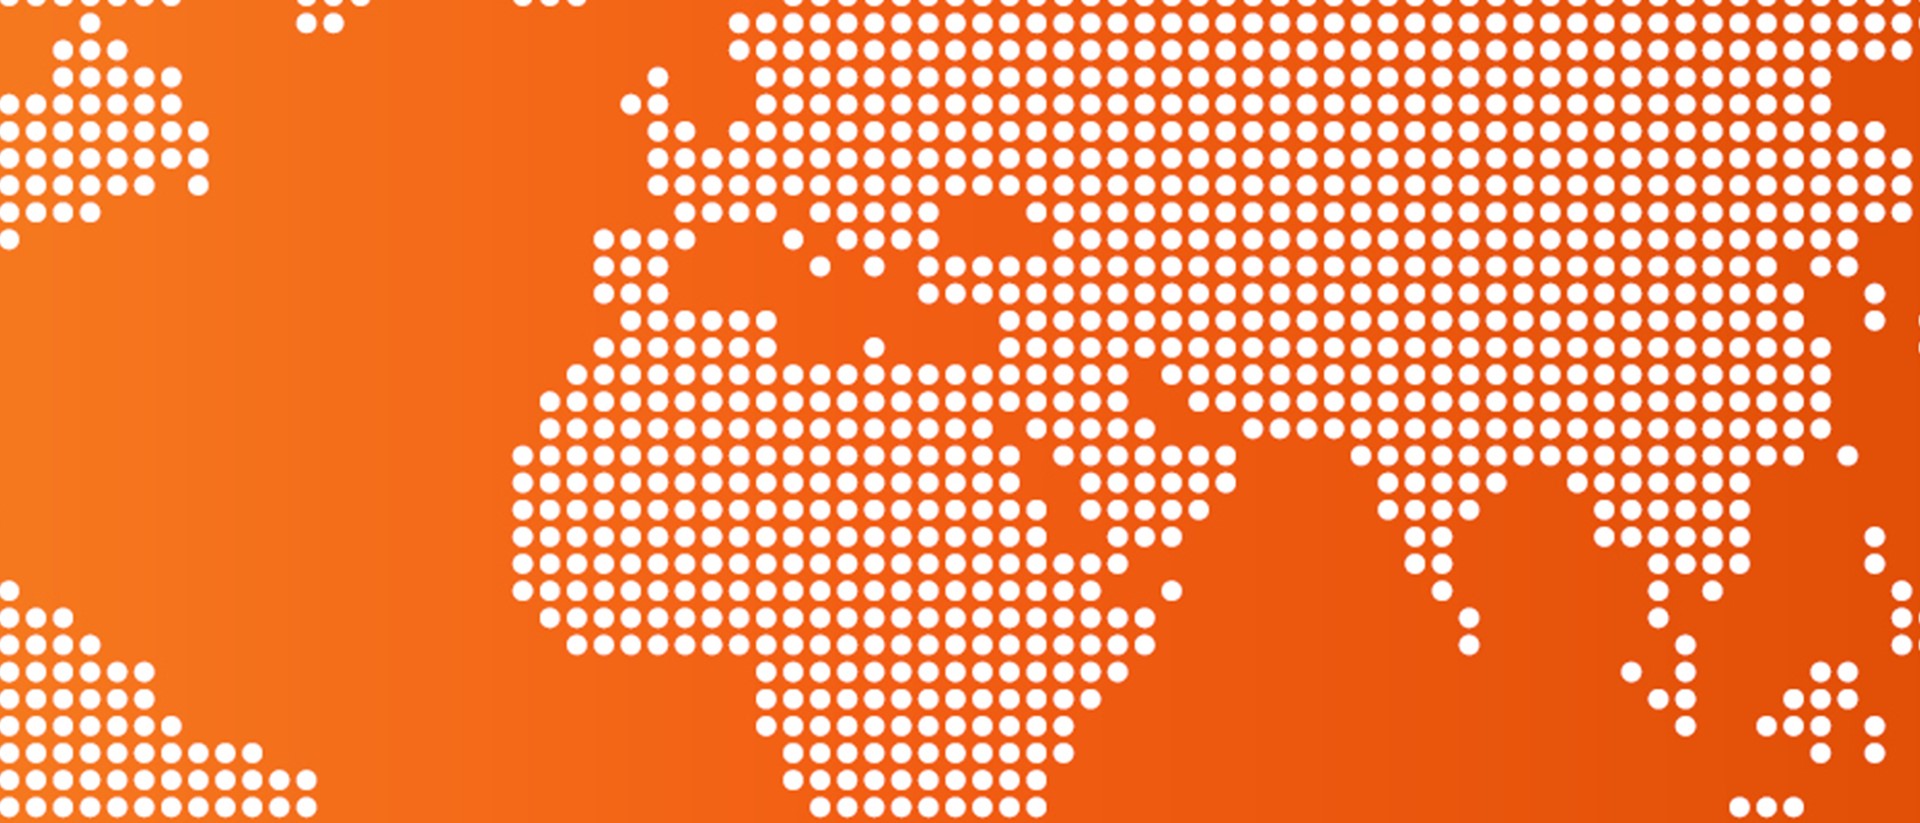 Image of the globe made up of white dots on an orange background